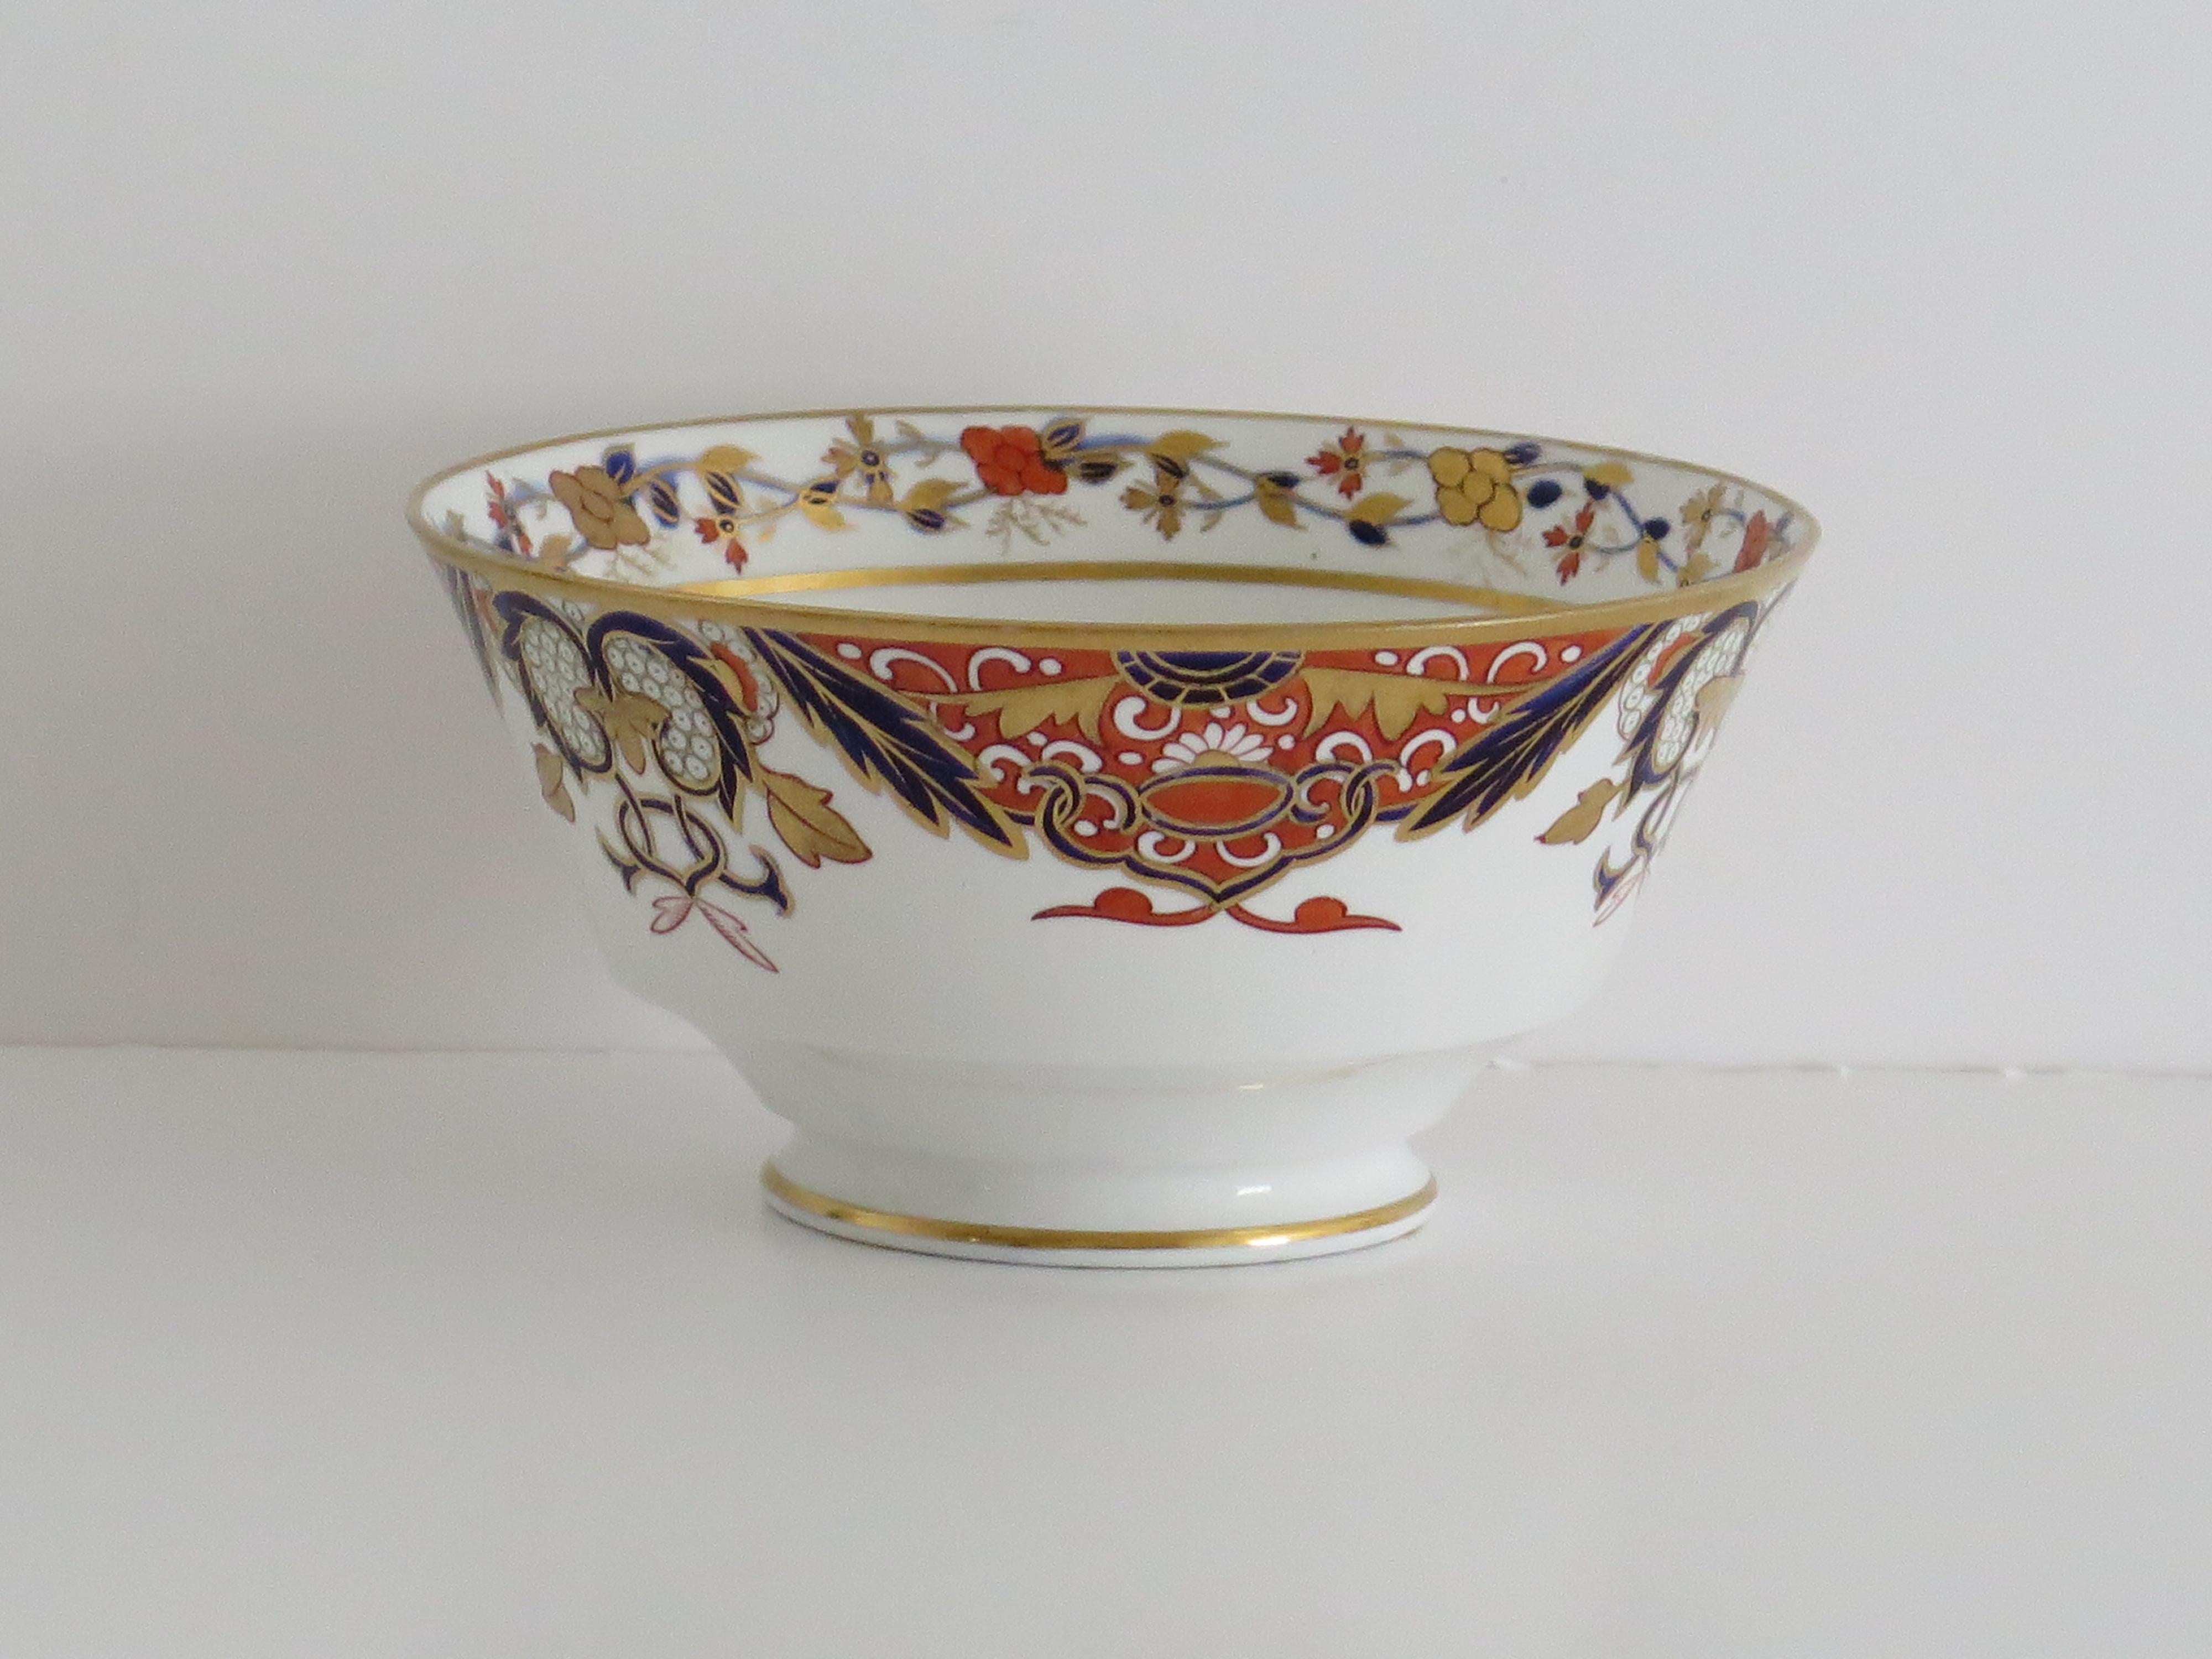 English Early 19th Century Spode Porcelain Slop Bowl in Japan Ptn 1946, circa 1810 For Sale